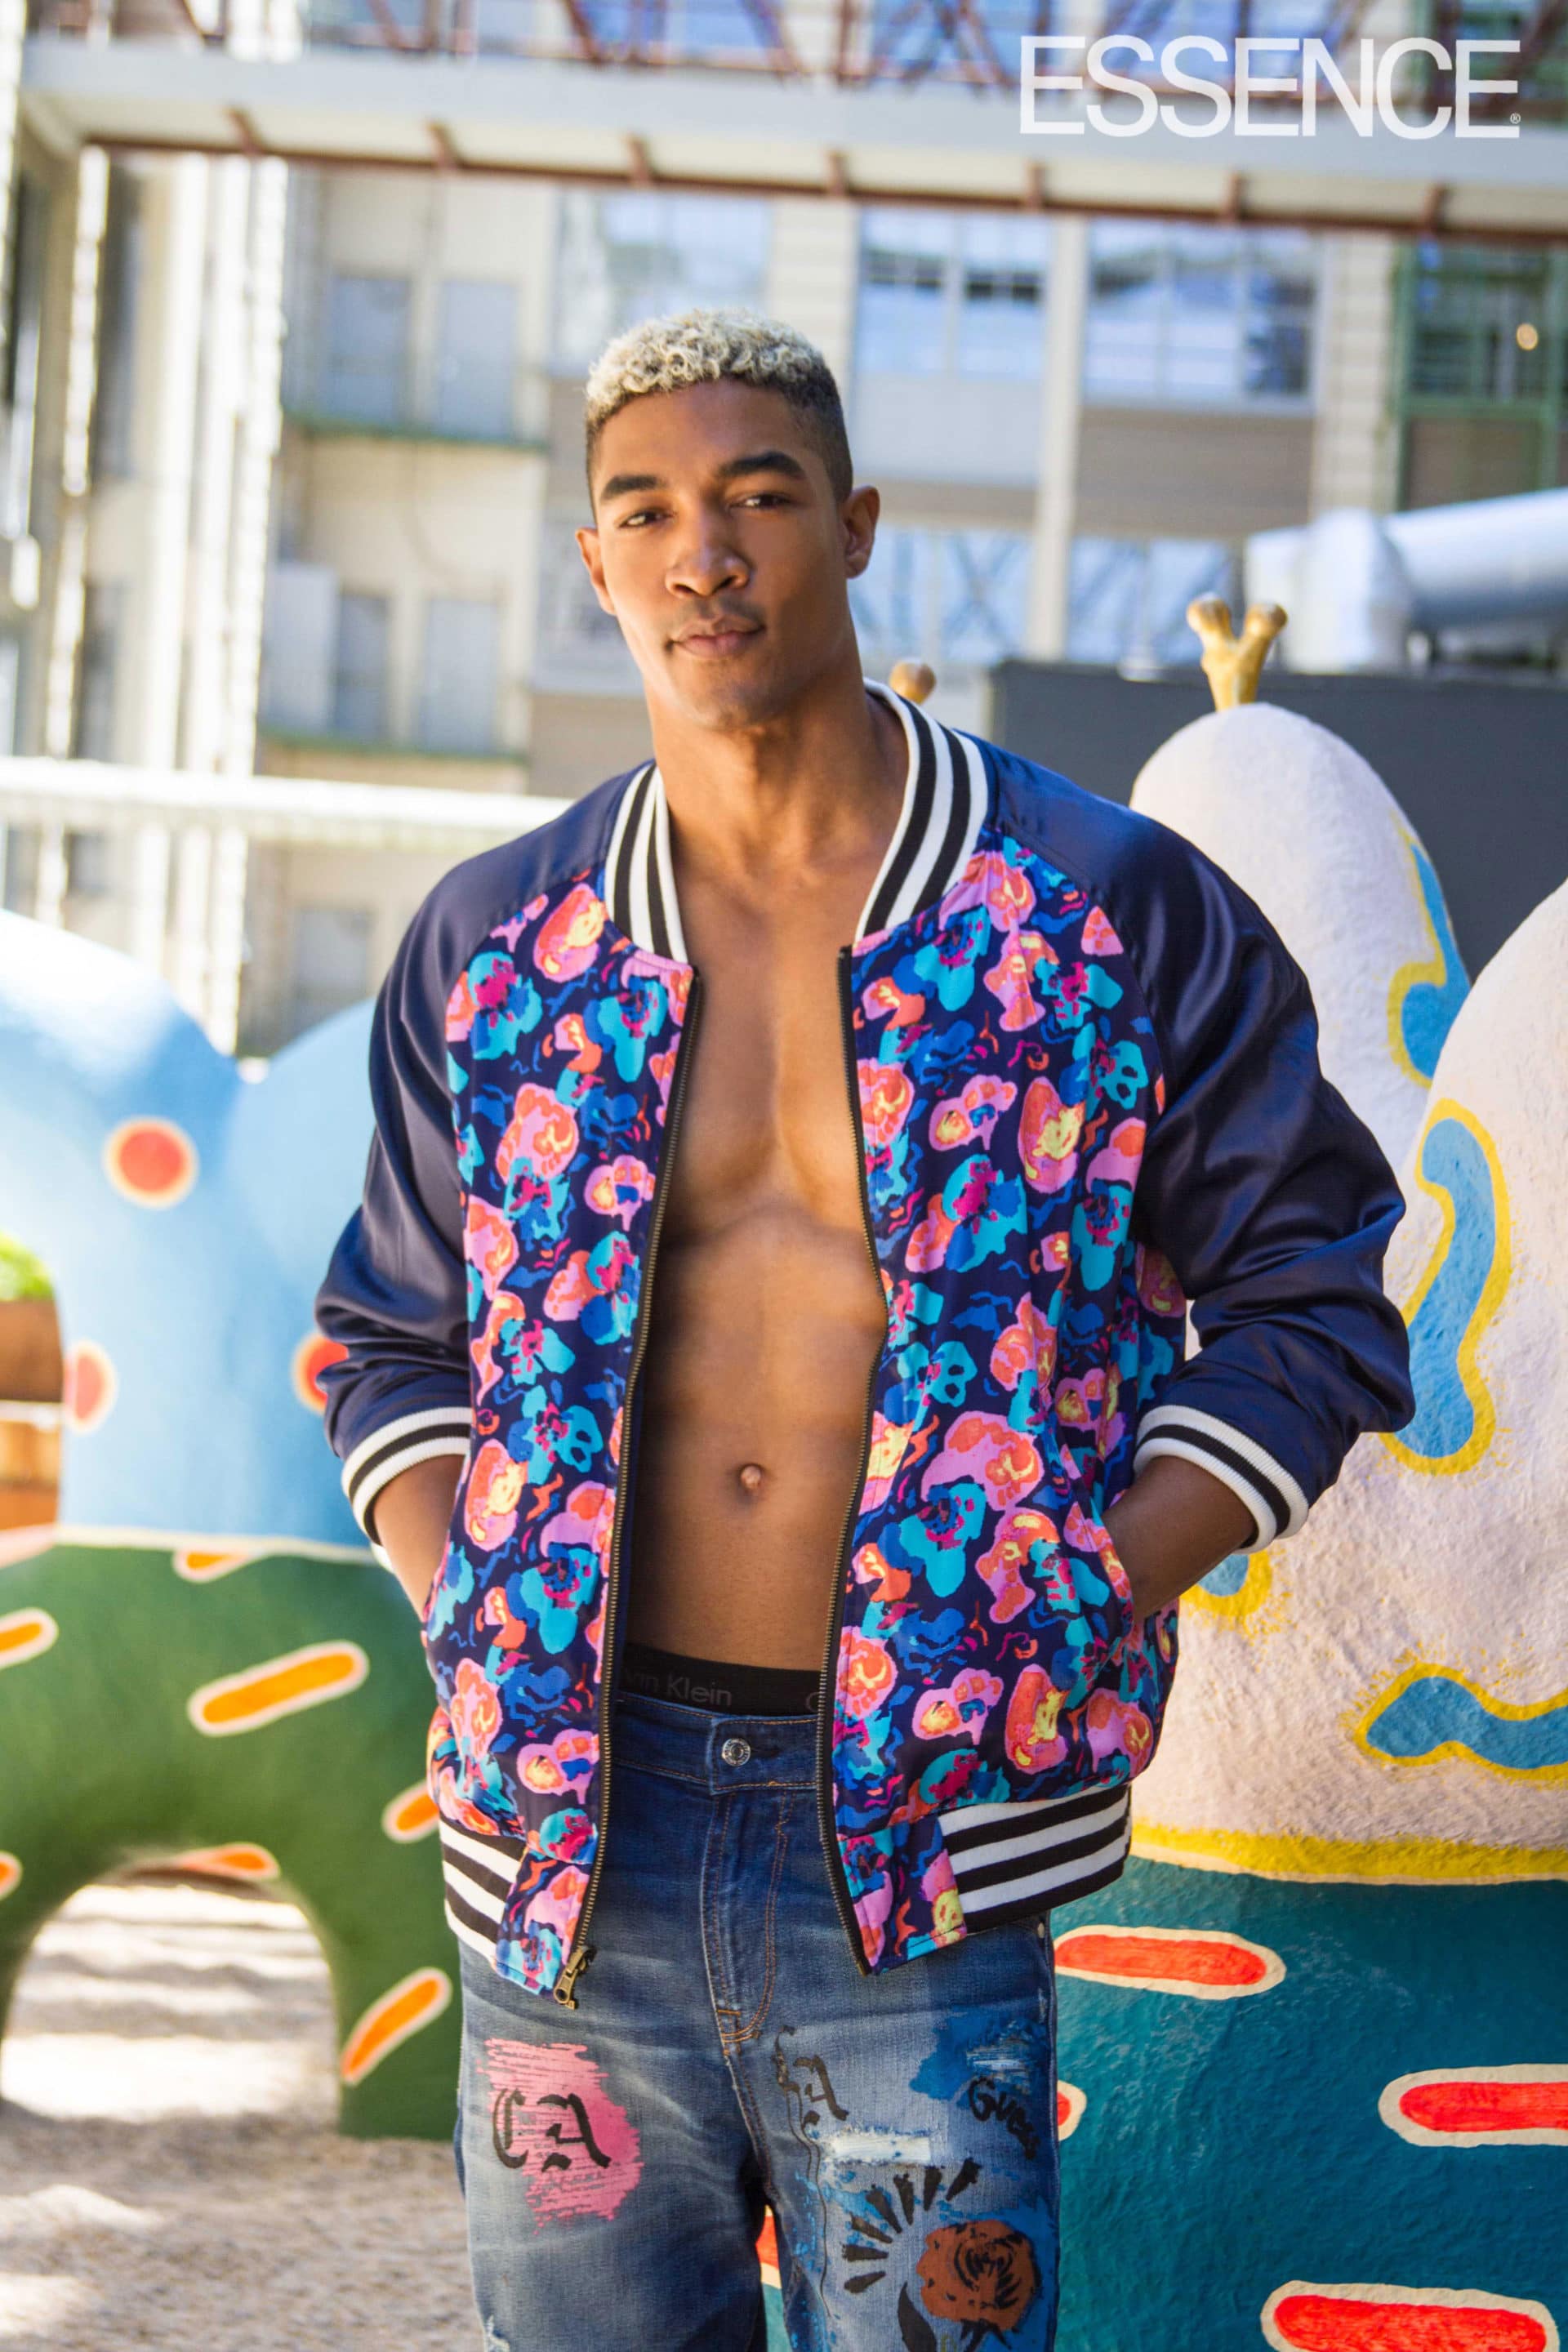 ESSENCE Exclusive: All The Hot Guys We Styled For Our Men's Pages